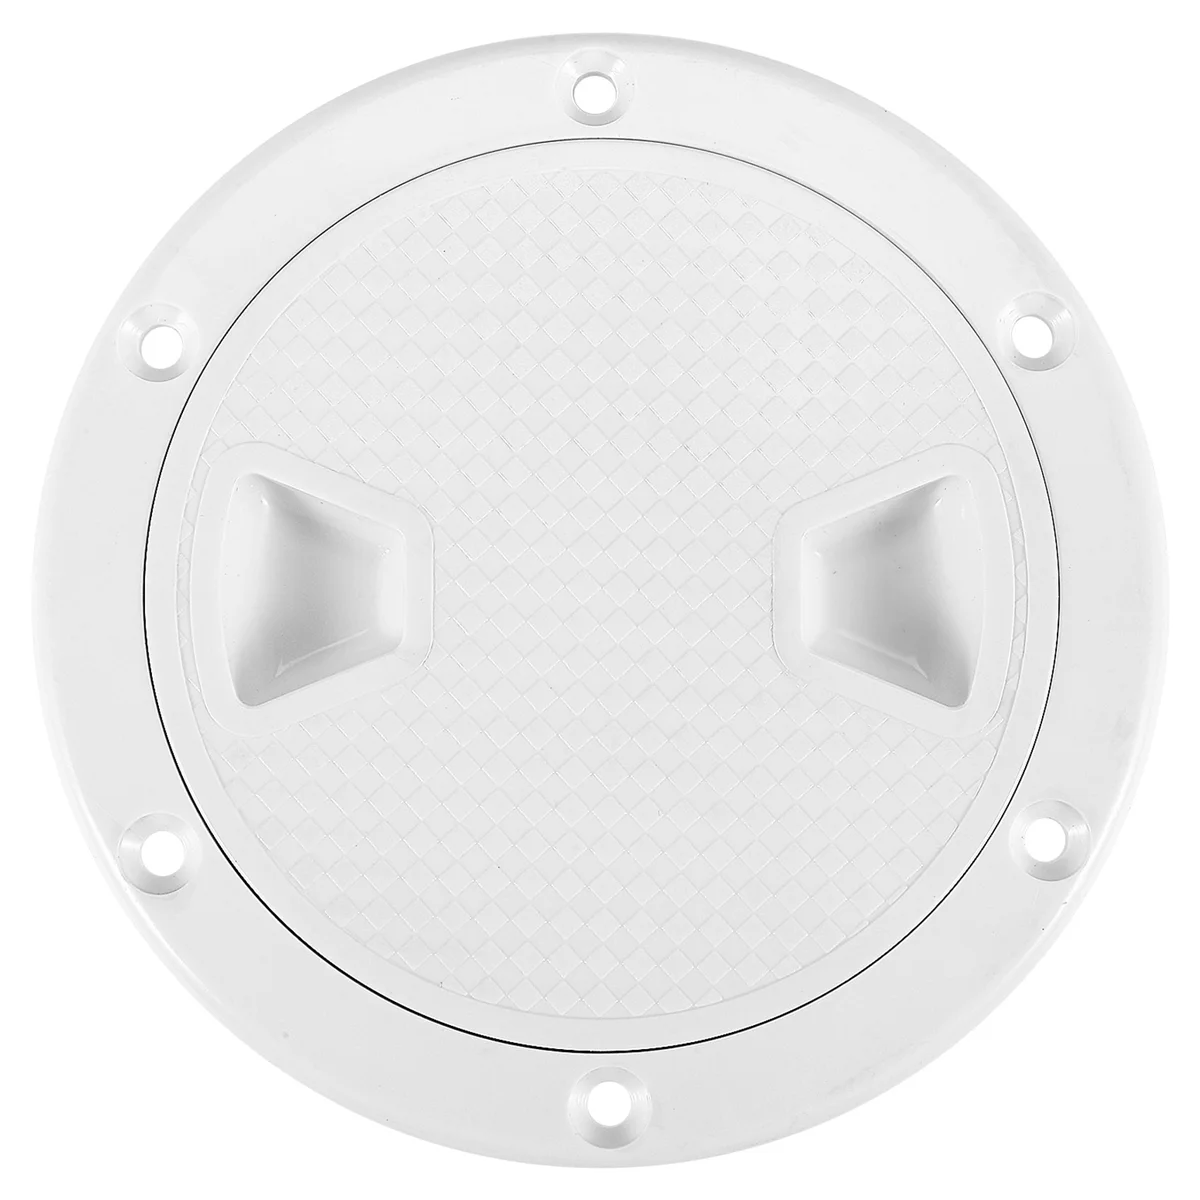 

Circular Non Slip Inspection Hatch-Boat Hatch Deck Plate with Detachable Cover for RV Marine Boat Kayaks-4Inch White